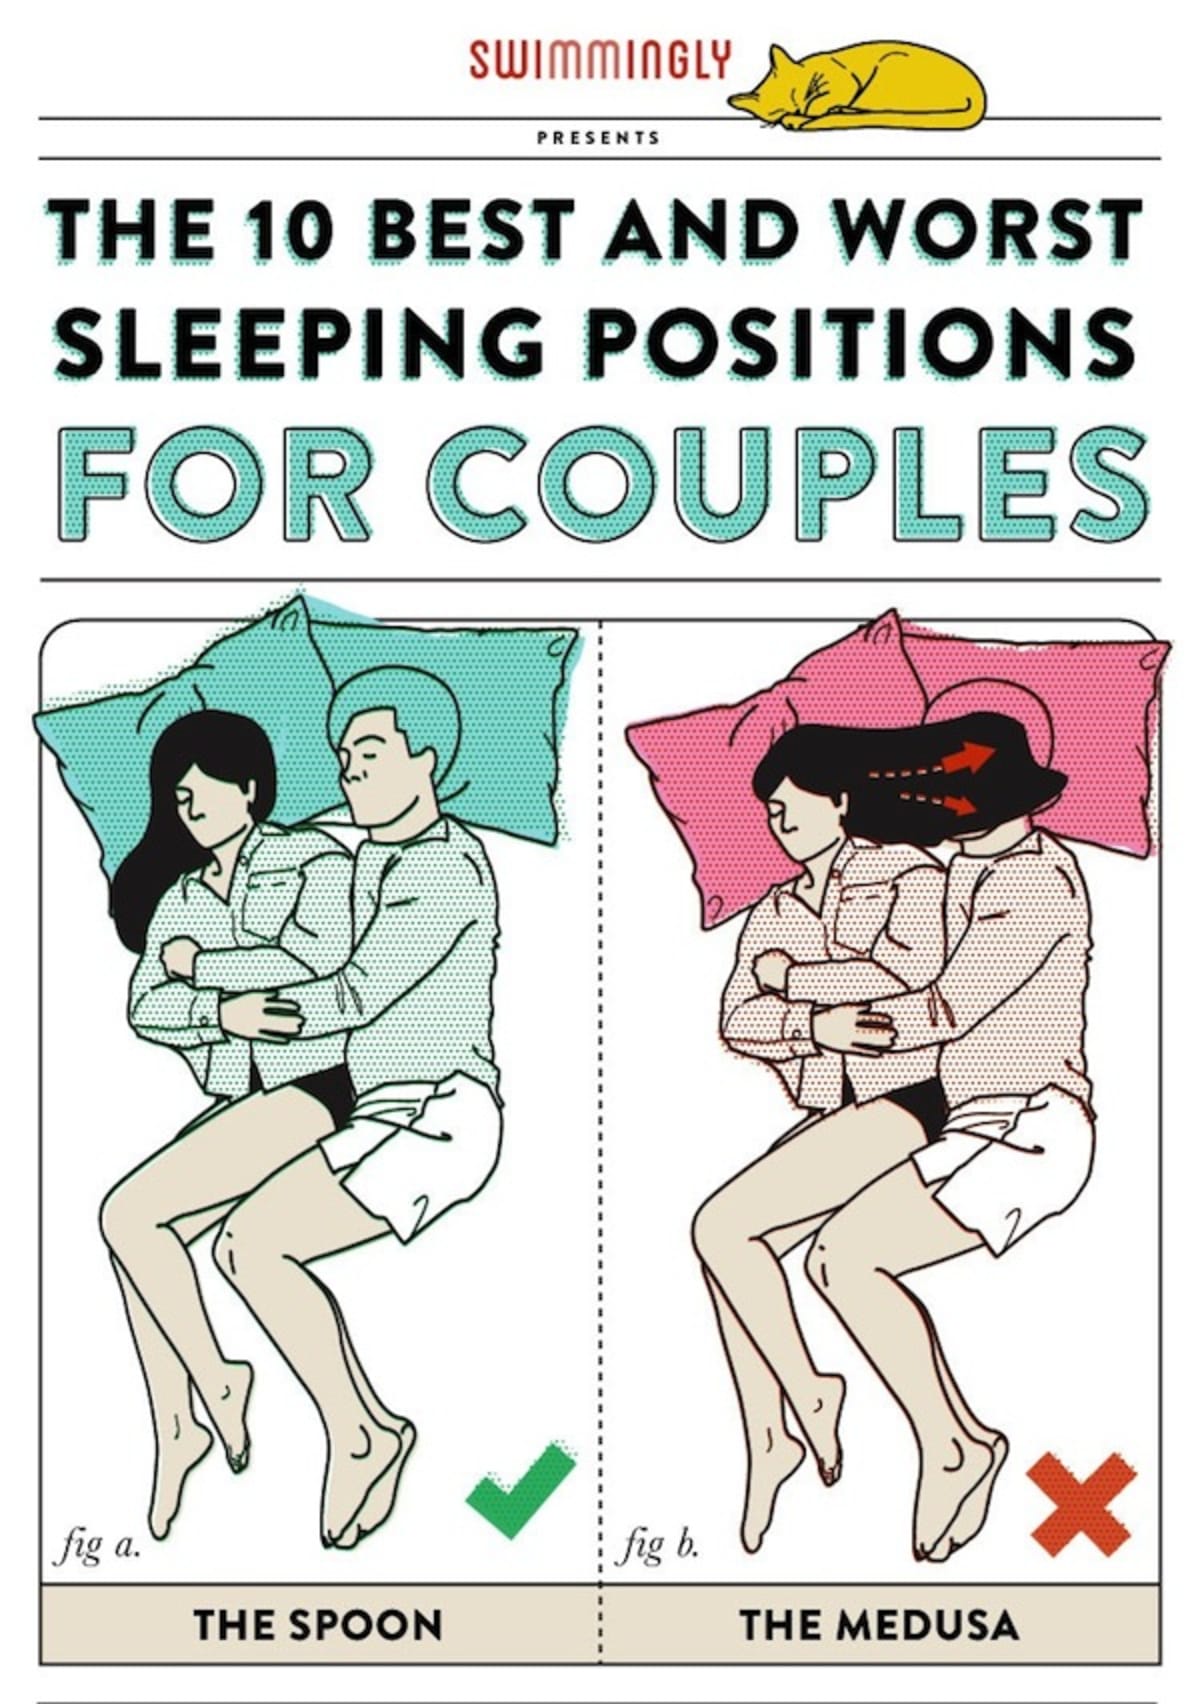 Visual Guide Documents The 10 Best And Worst Sleeping Positions For